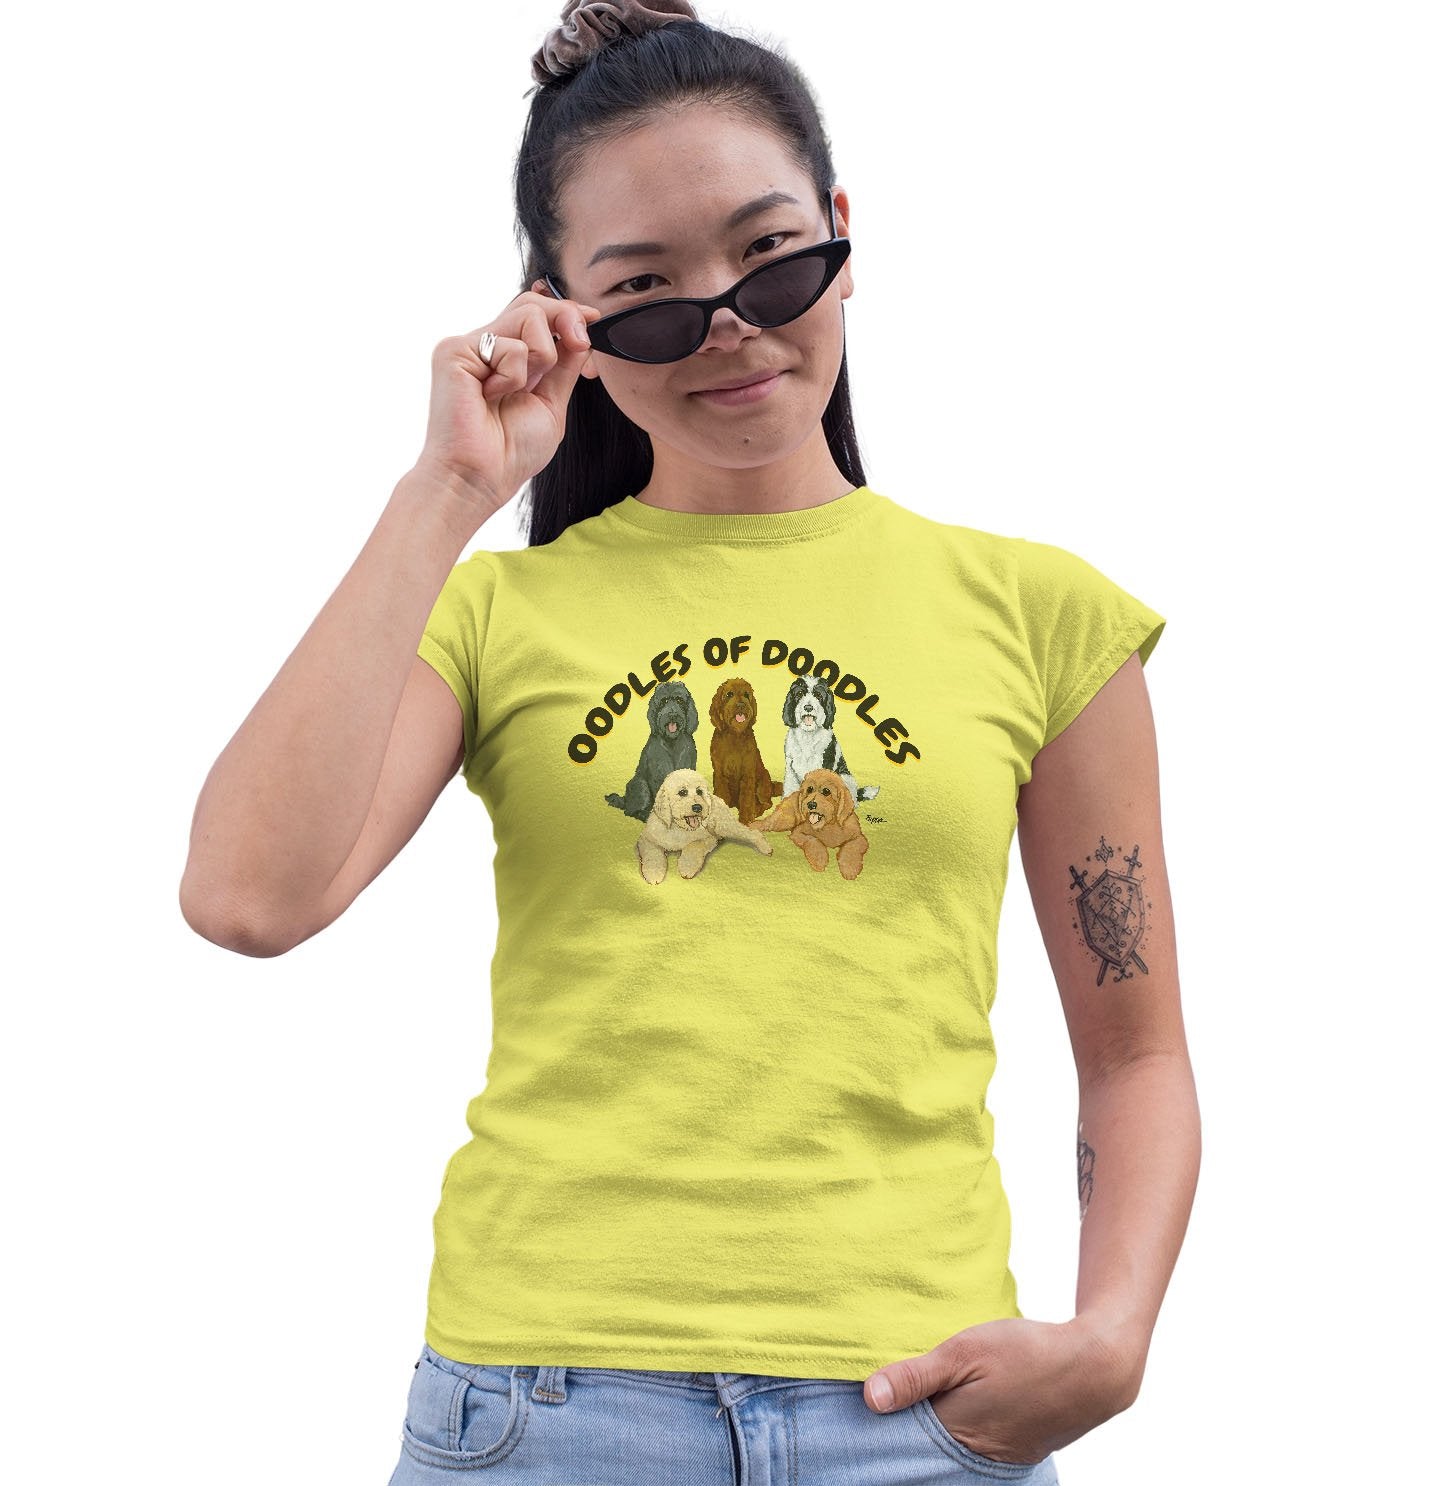 Oodles of Doodles - Women's Fitted T-Shirt - Animal Tee